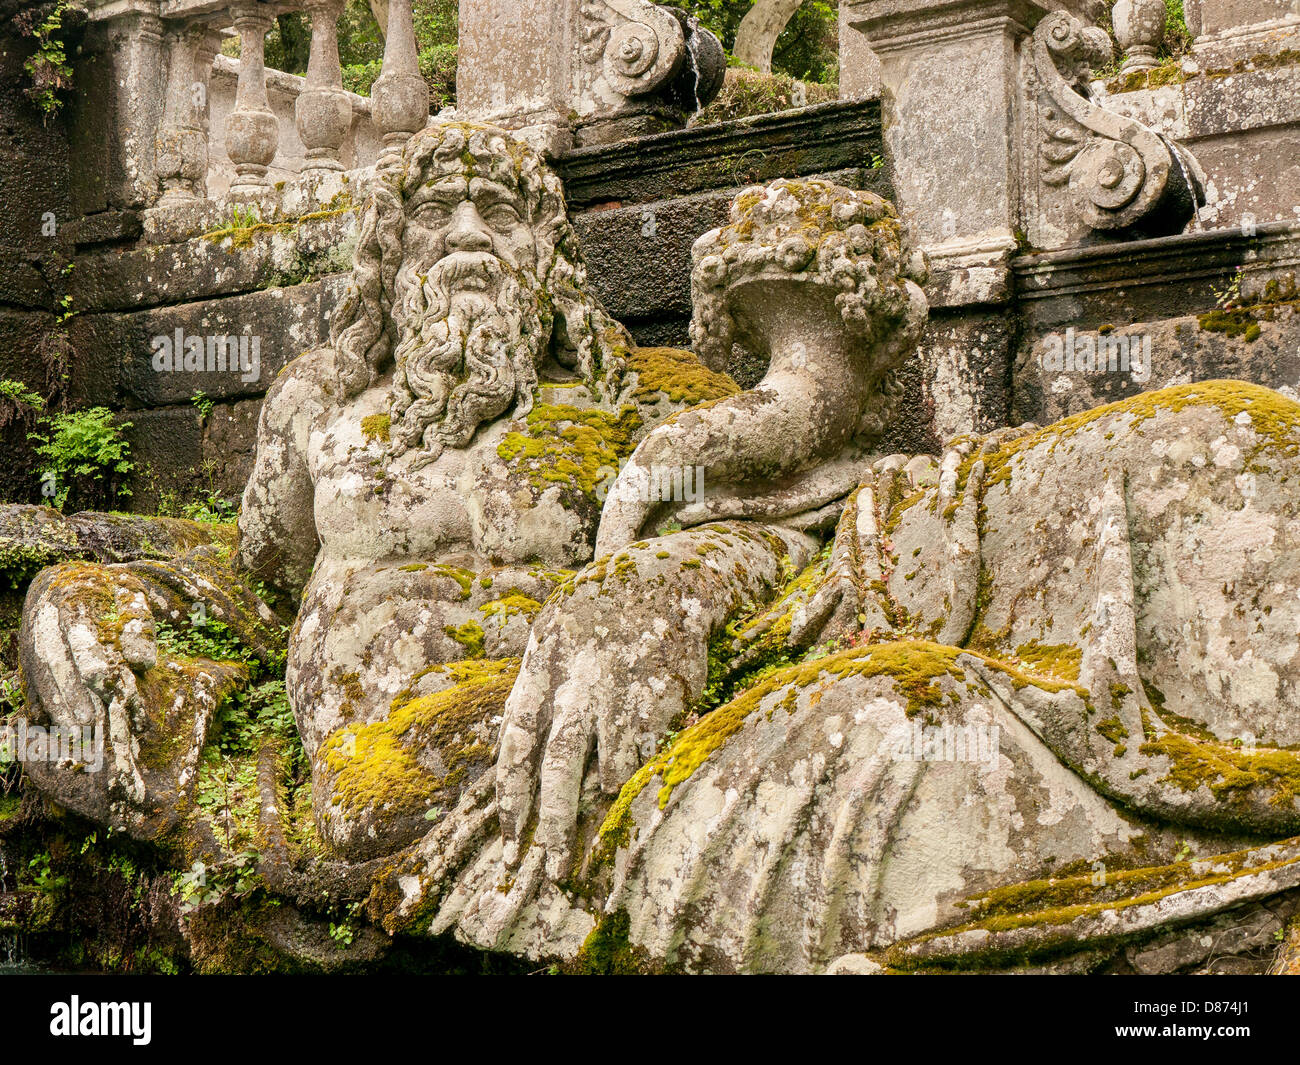 Statues in the fountain in the enchanting gardens of Villa Lante in Bagnaia, Umbria, Italy Stock Photo